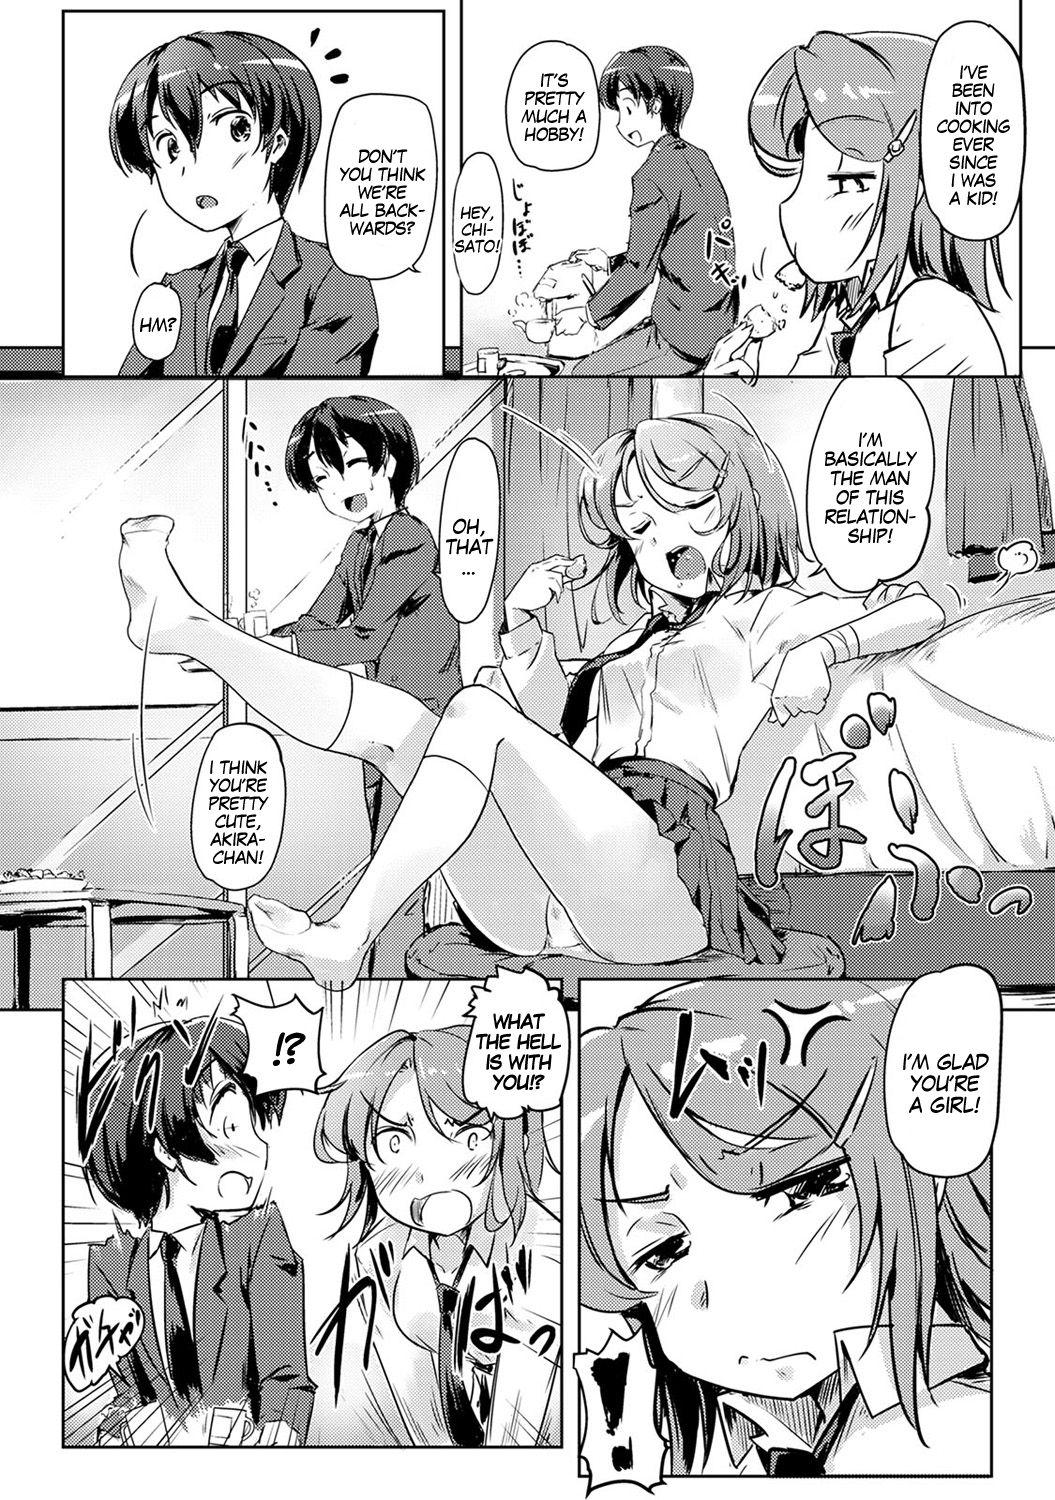 Ecchi Shitara Irekawacchatta!? | We Switched Our Bodies After Having Sex!? Ch. 1 1